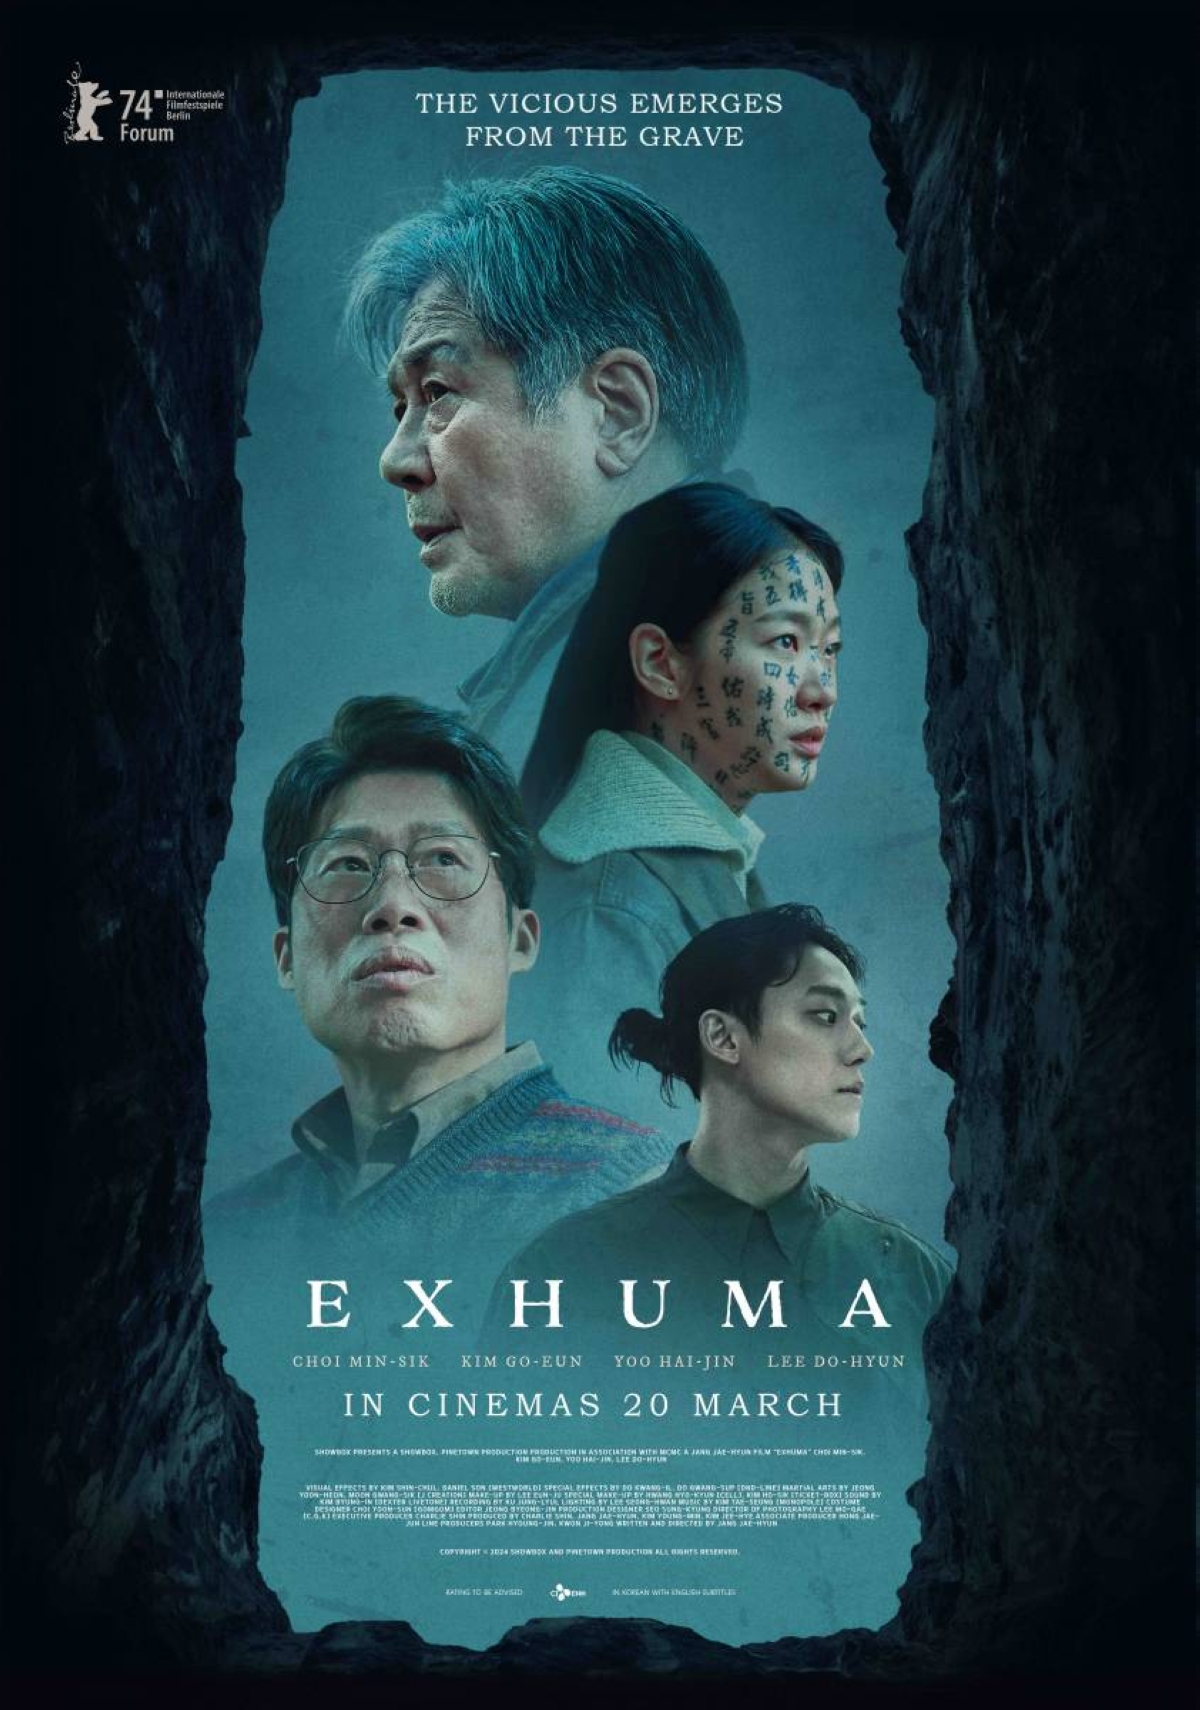 A chilling excavation disrupts a peaceful village in the Korean horror 'Exhuma.'